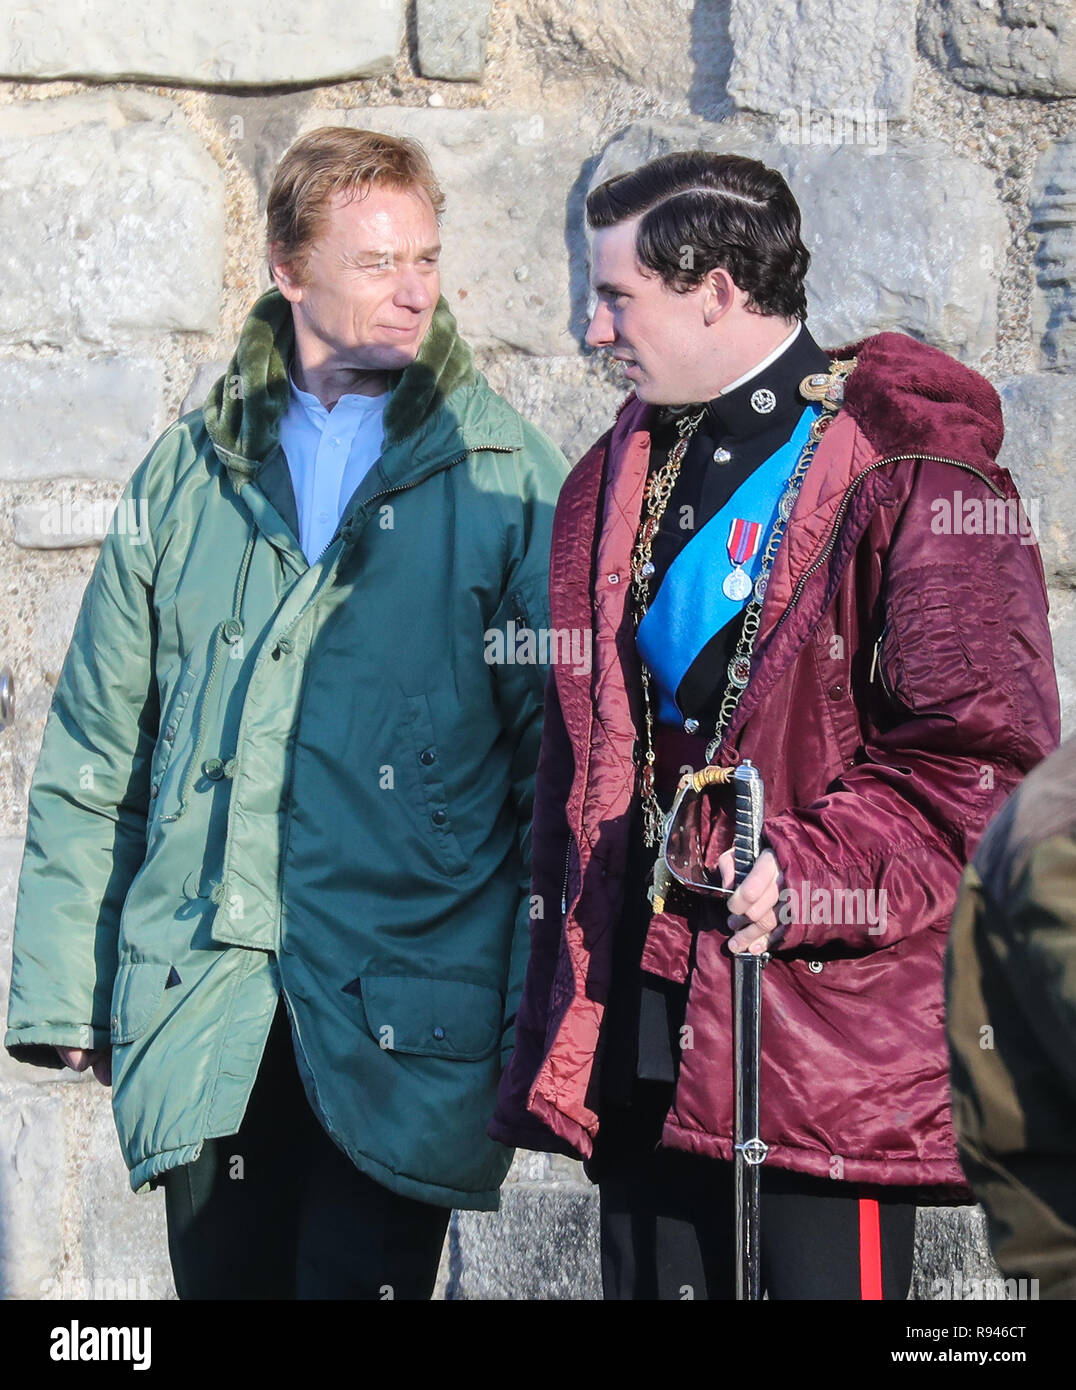 Olivia Colman, Josh O'Connor and Tobias Menzies film a scene for the Netflix drama at Caernarfon Castle. The Queen presents the newly invested Prince of Wales to the Welsh people from Queen Eleanor's Gate.  Featuring: Ben Daniels, Josh O'Connor Where: Caernafon, United Kingdom When: 18 Nov 2018 Credit: WENN.com Stock Photo